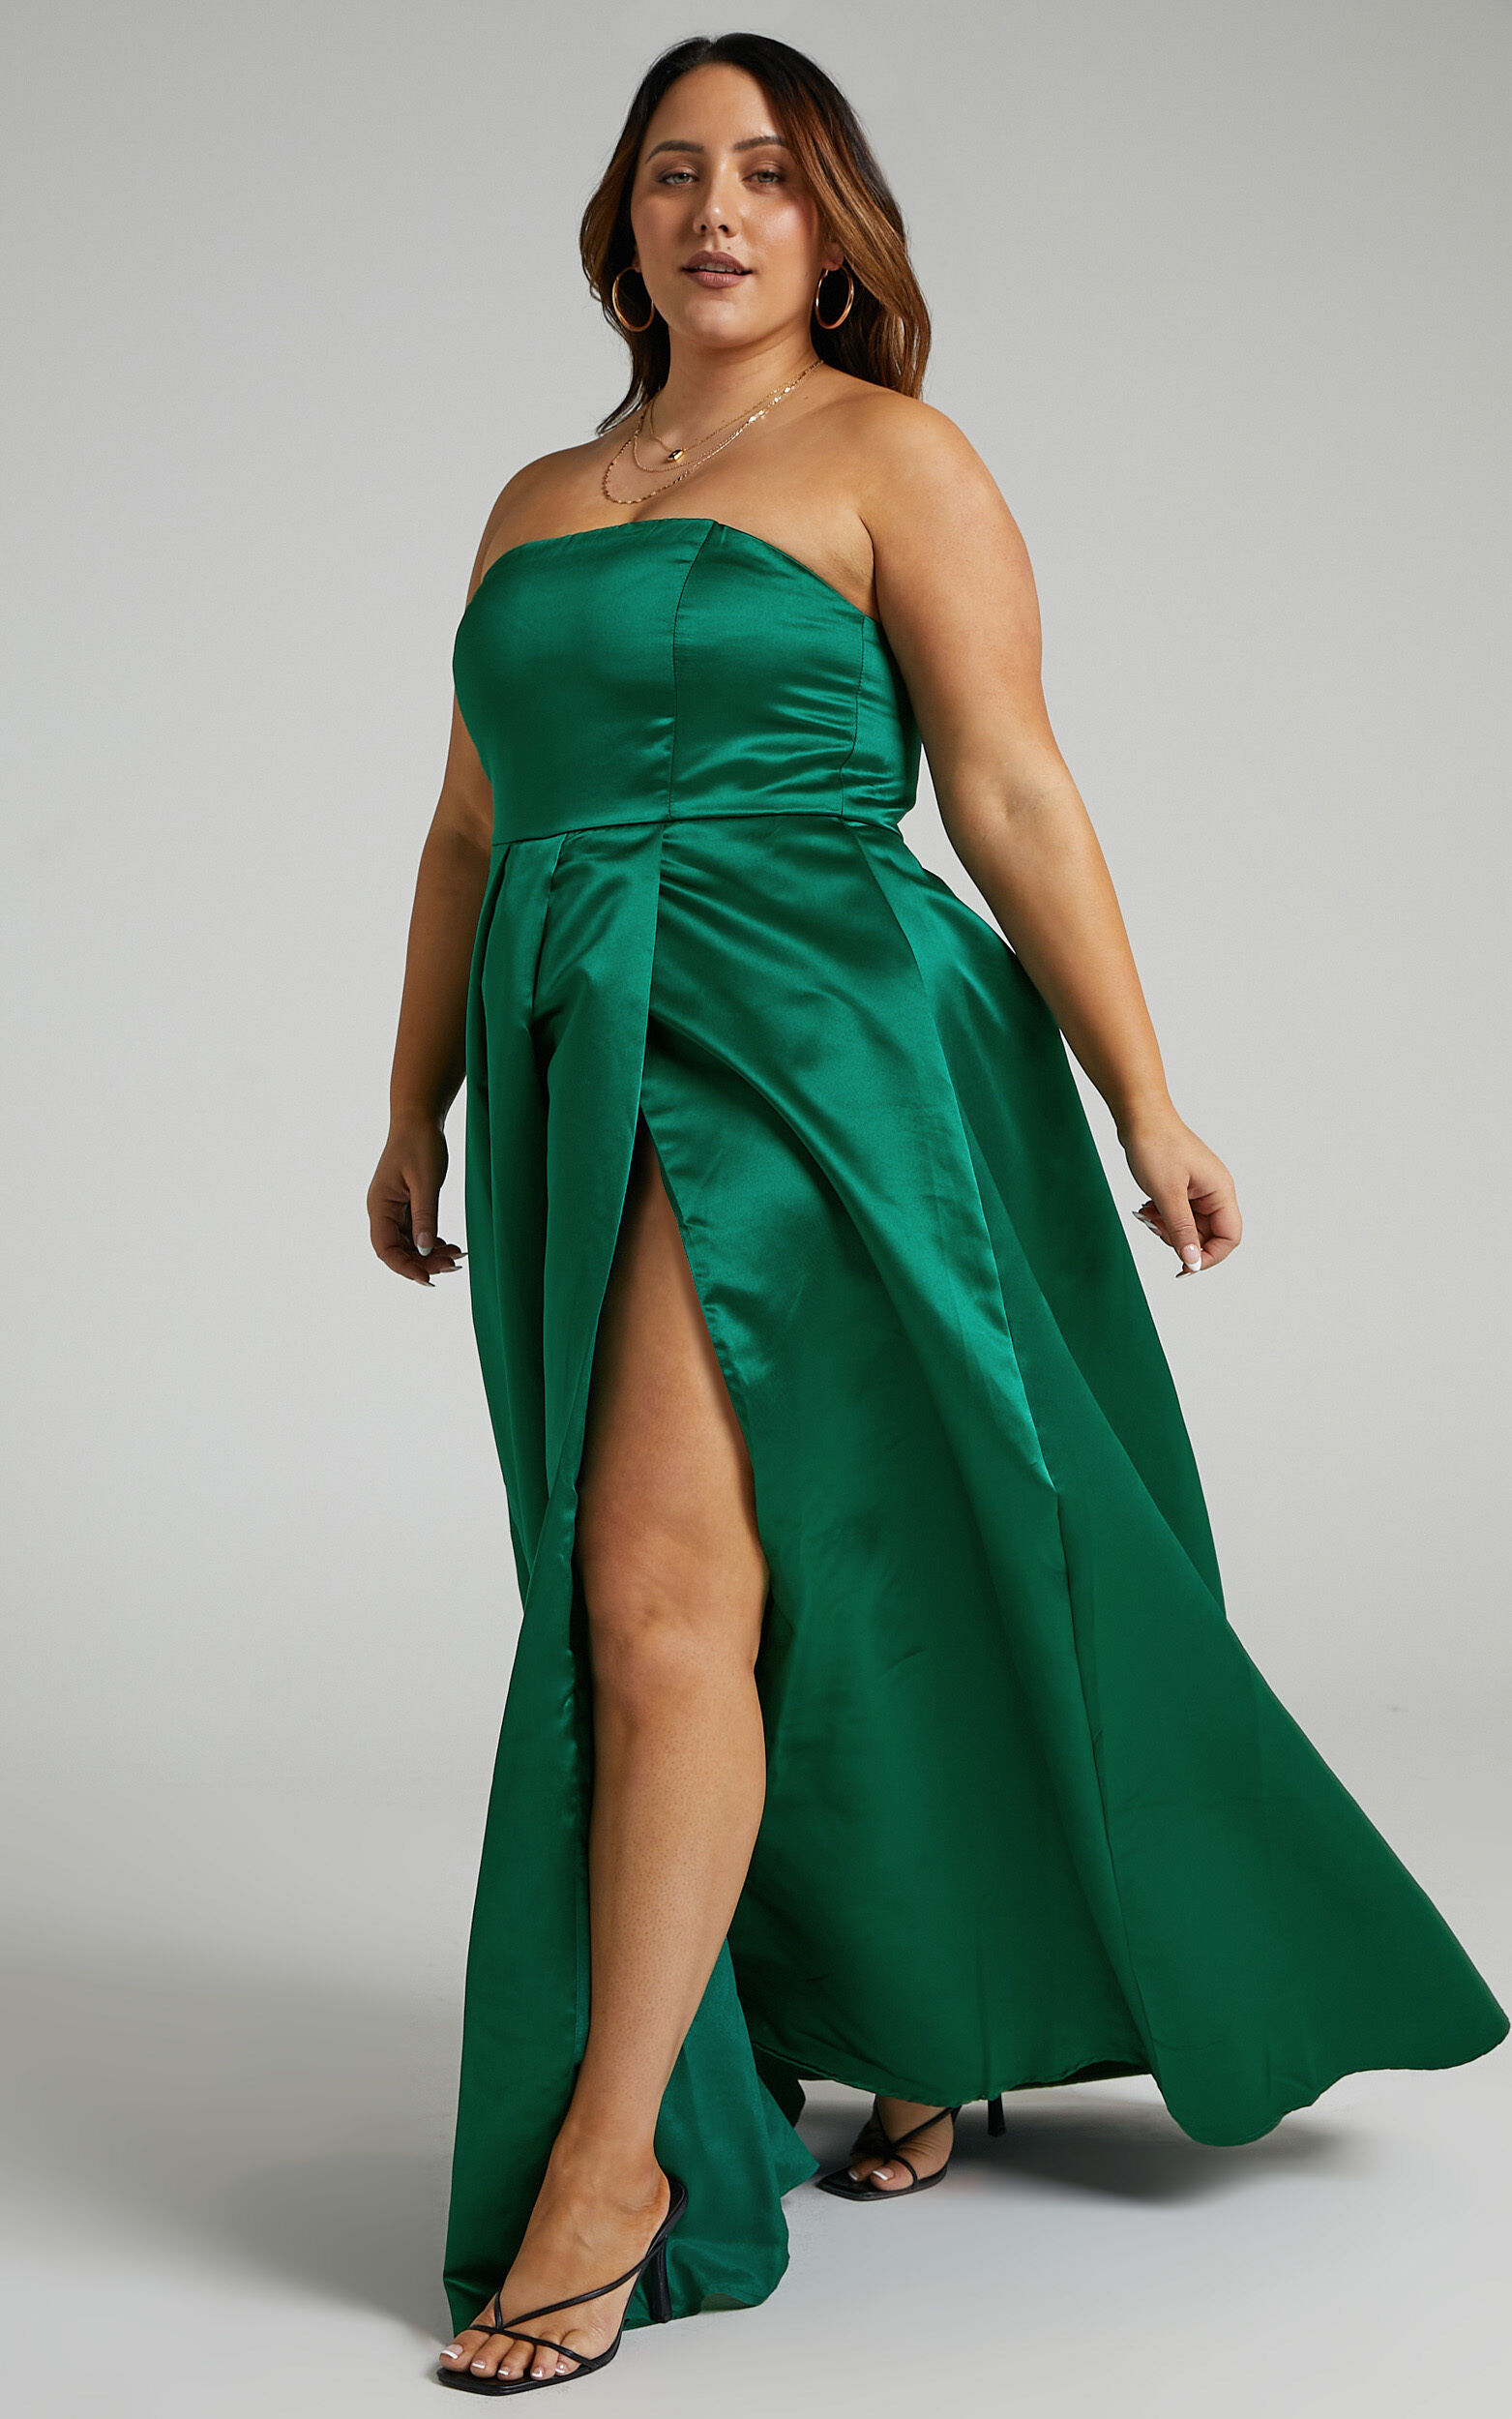 Queen Of The Show Strapless Maxi Dress in Emerald Satin - 04, GRN1, super-hi-res image number null